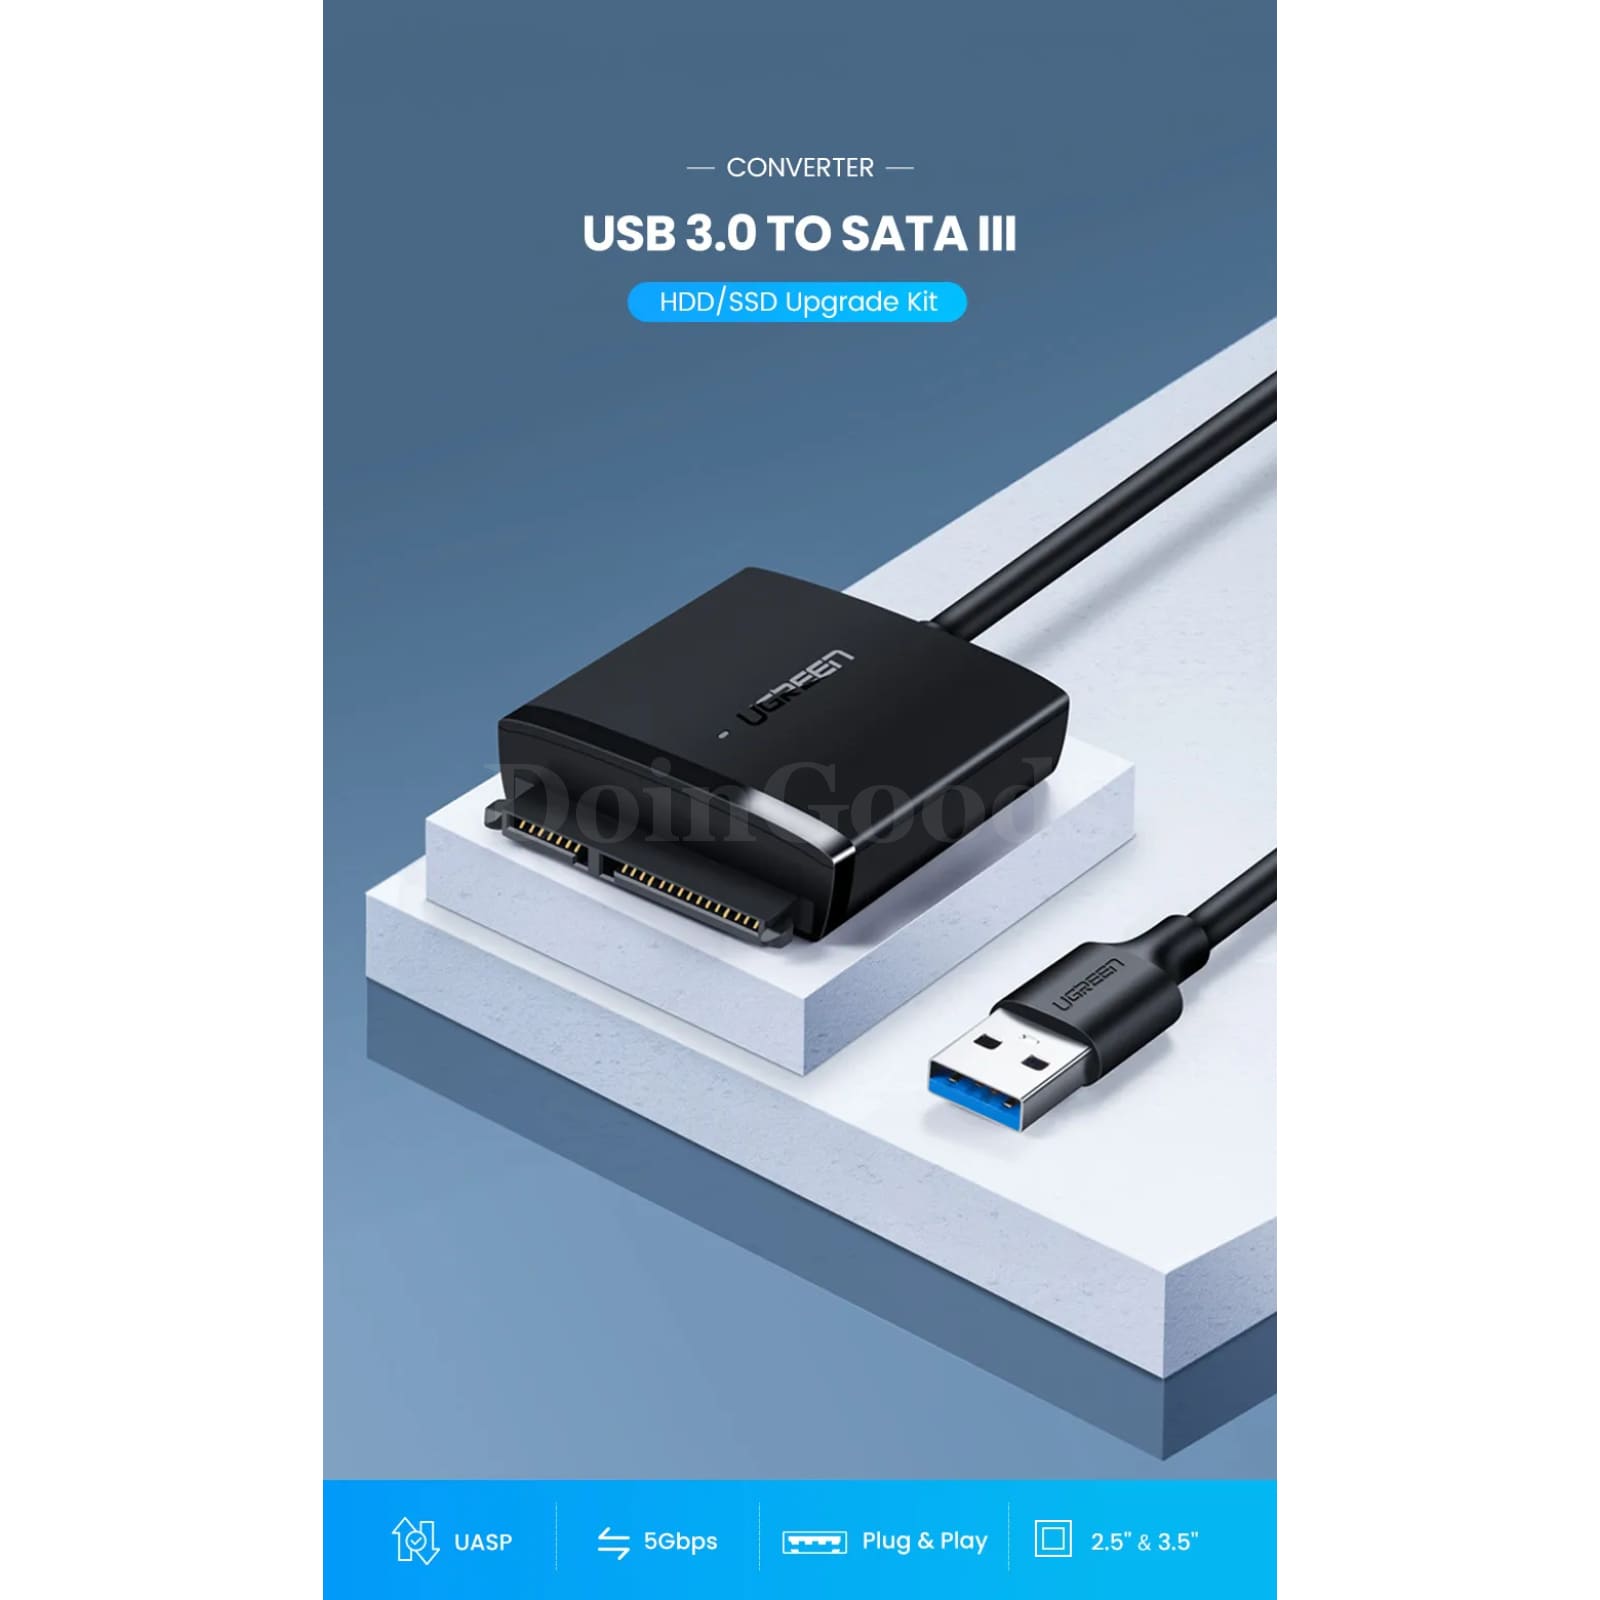 Ugreen Sata 3 To Usb Adapter 3.0/2.0 Cable Converter For 2.5 3.5 Hdd Ssd 301635